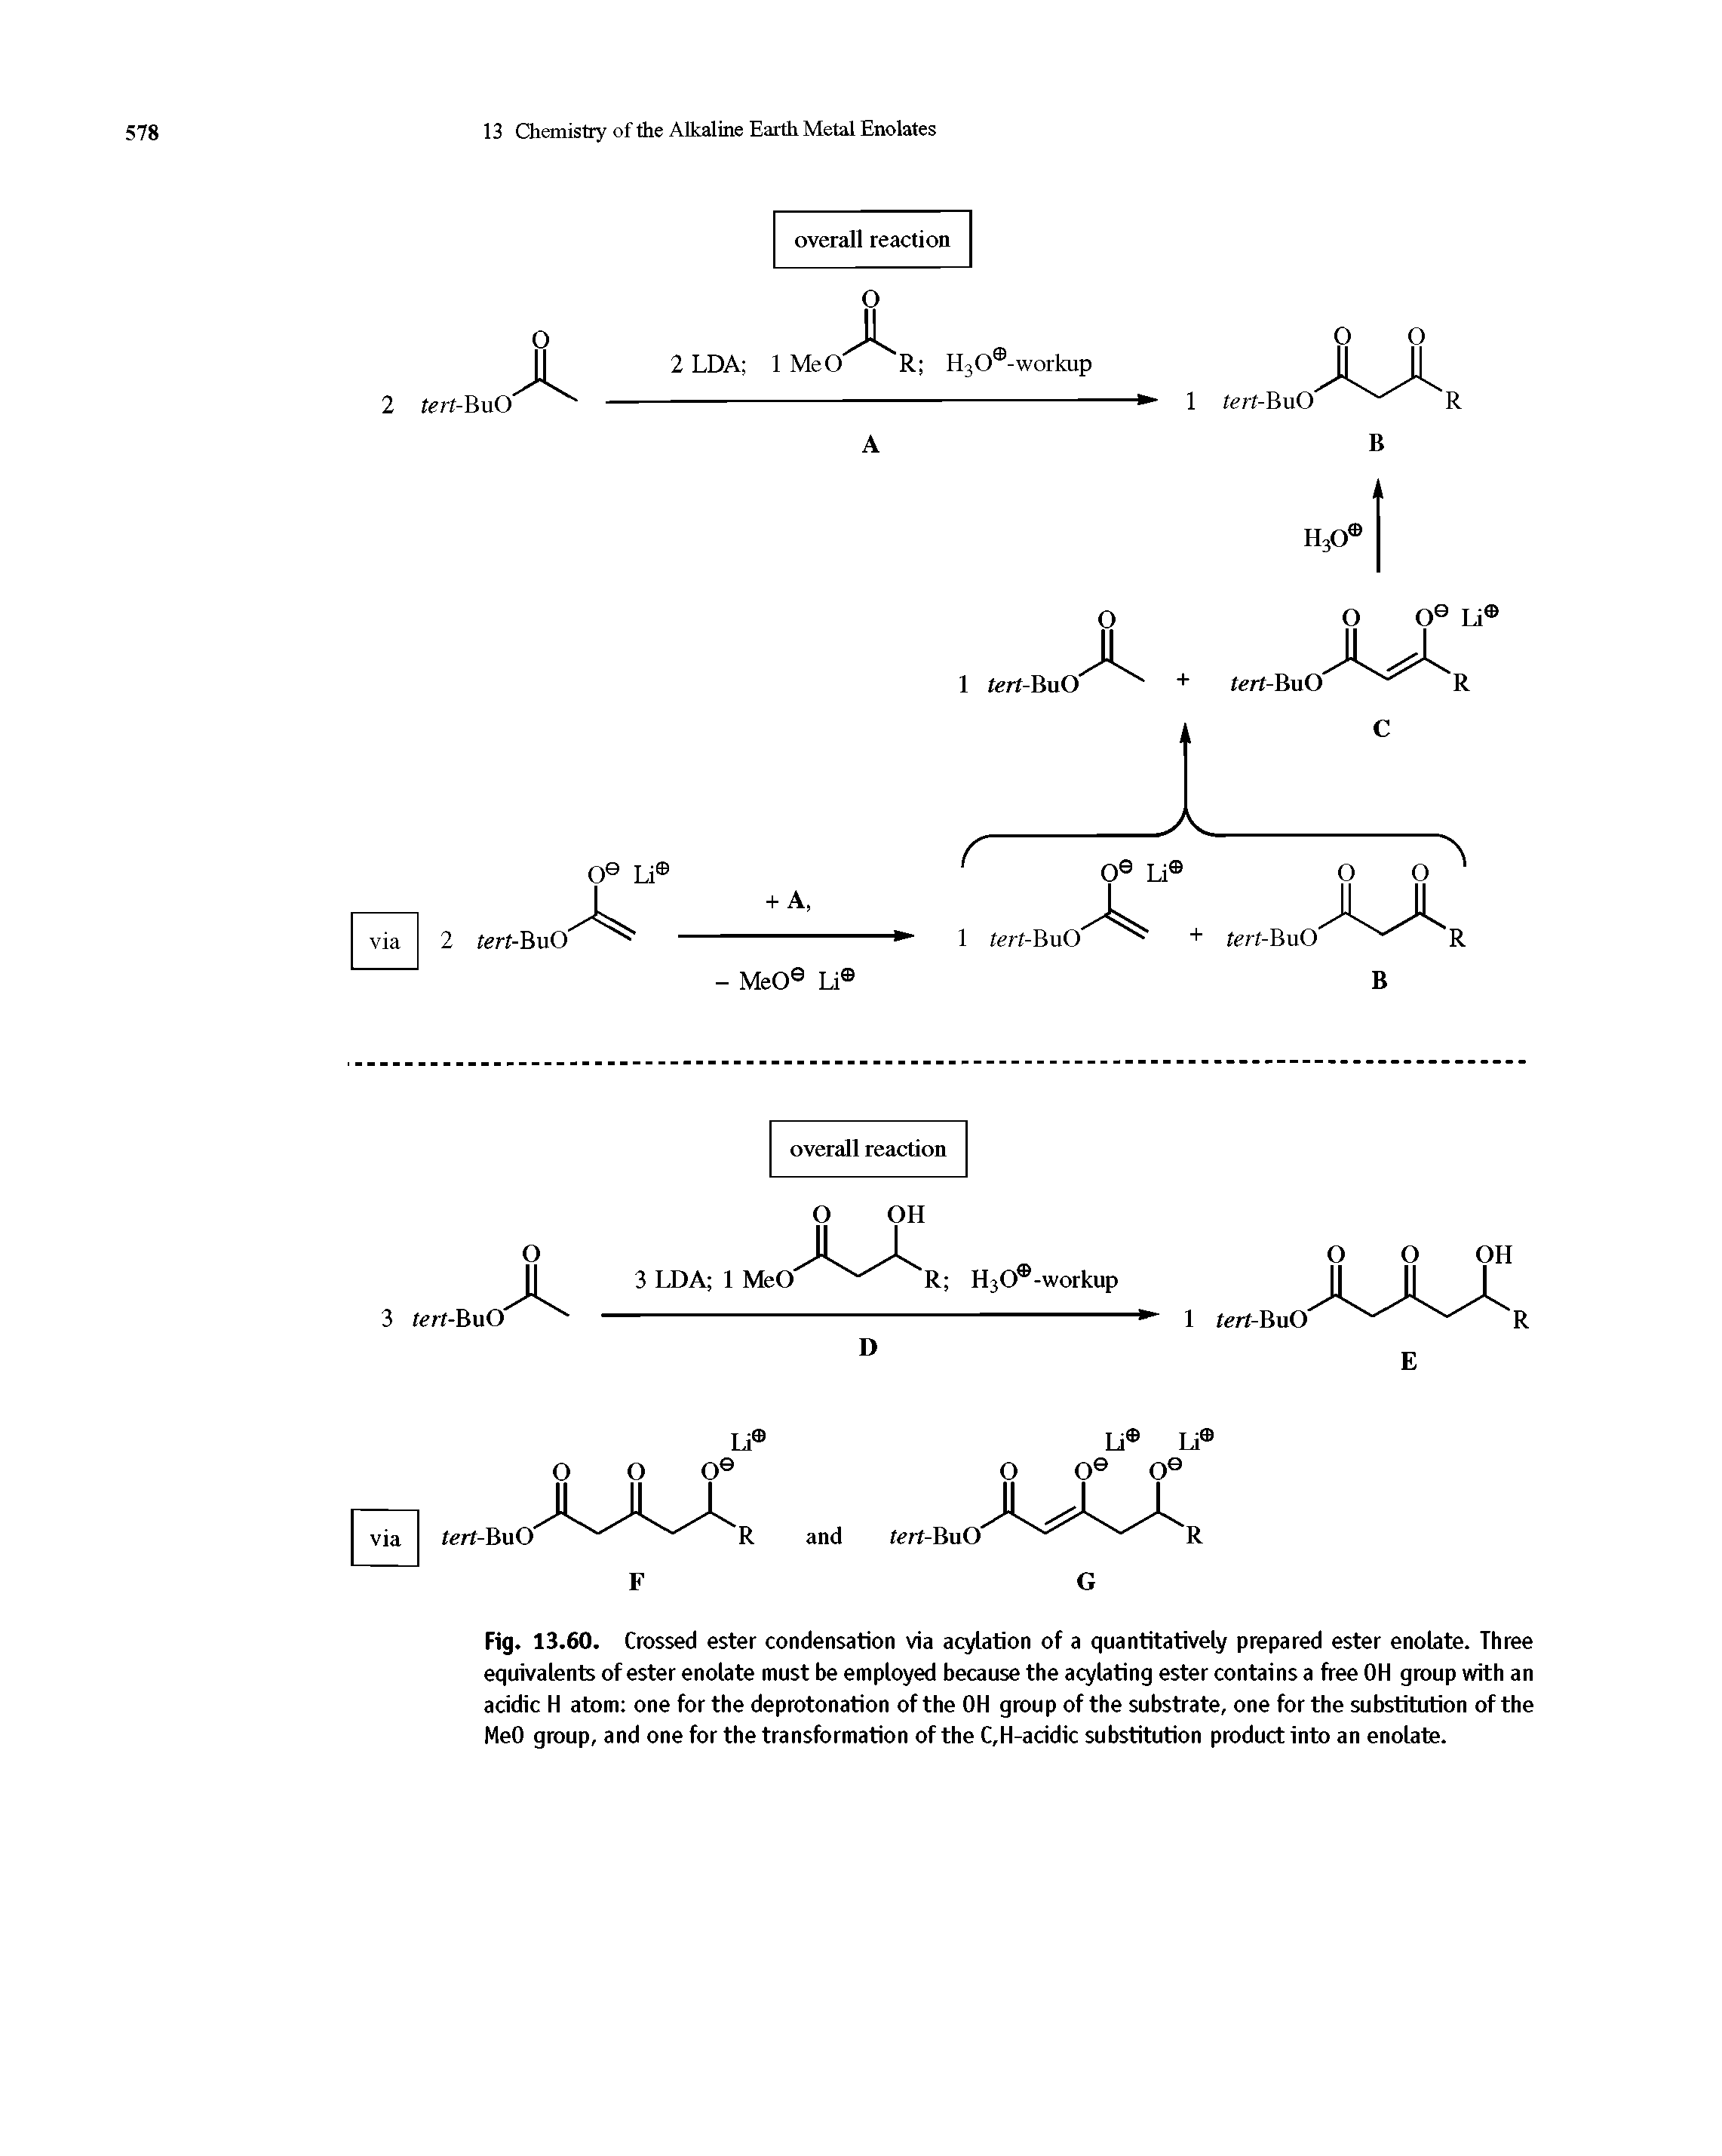 Fig. 13.60. Crossed ester condensation via acylation of a quantitatively prepared ester enolate. Three equivalents of ester enolate must be employed because the acylating ester contains a free OH group with an acidic H atom one for the deprotonation of the OH group of the substrate, one for the substitution of the MeO group, and one for the transformation of the C,H-acidic substitution product into an enolate.